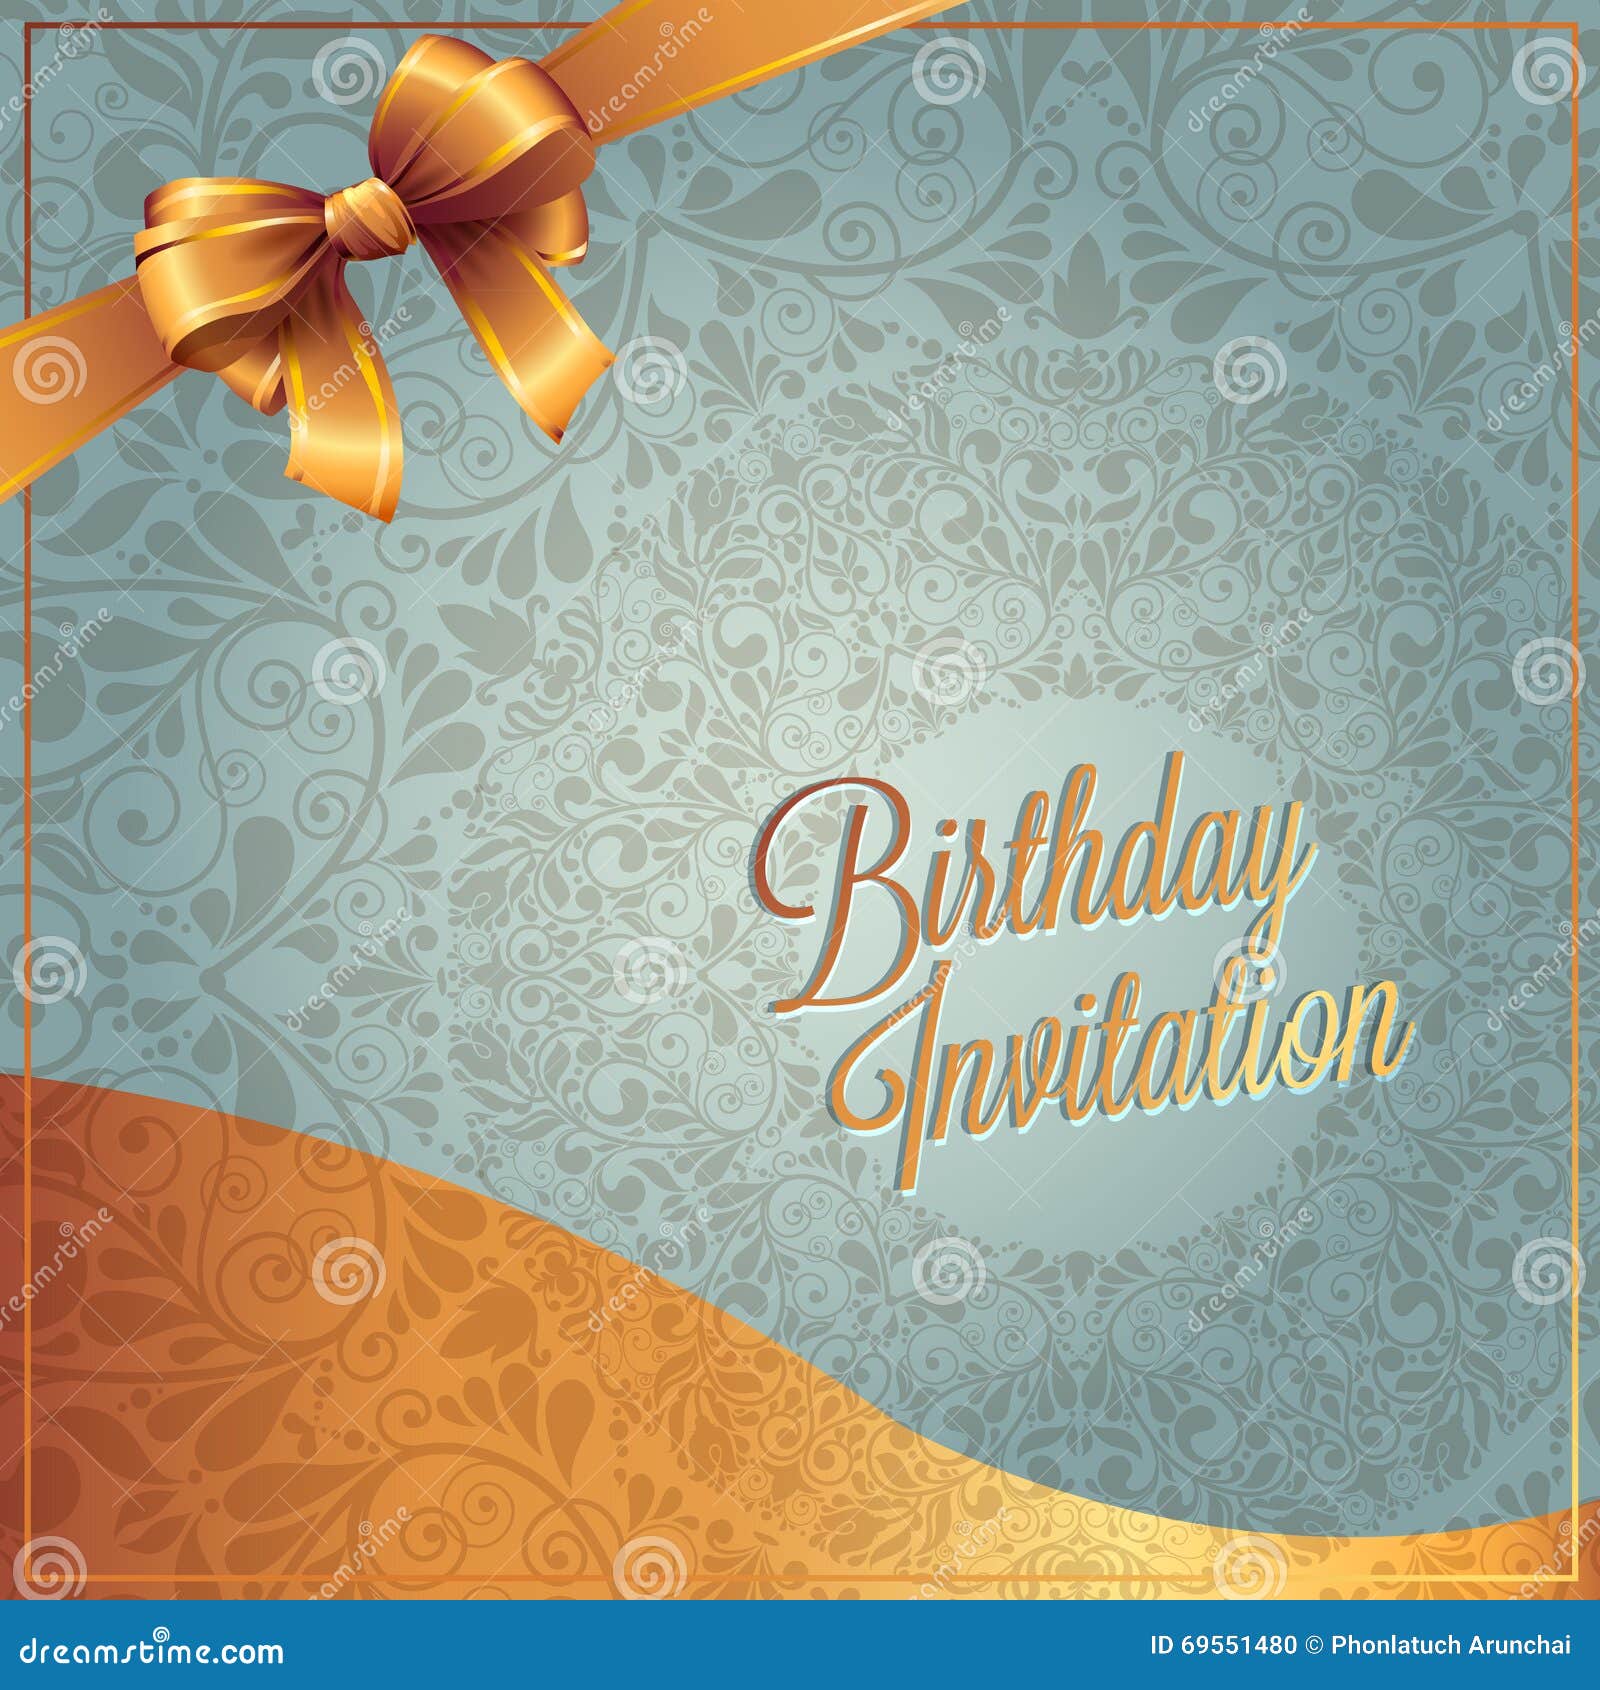 Birthday Card with Background Vector Design Stock Vector - Illustration ...